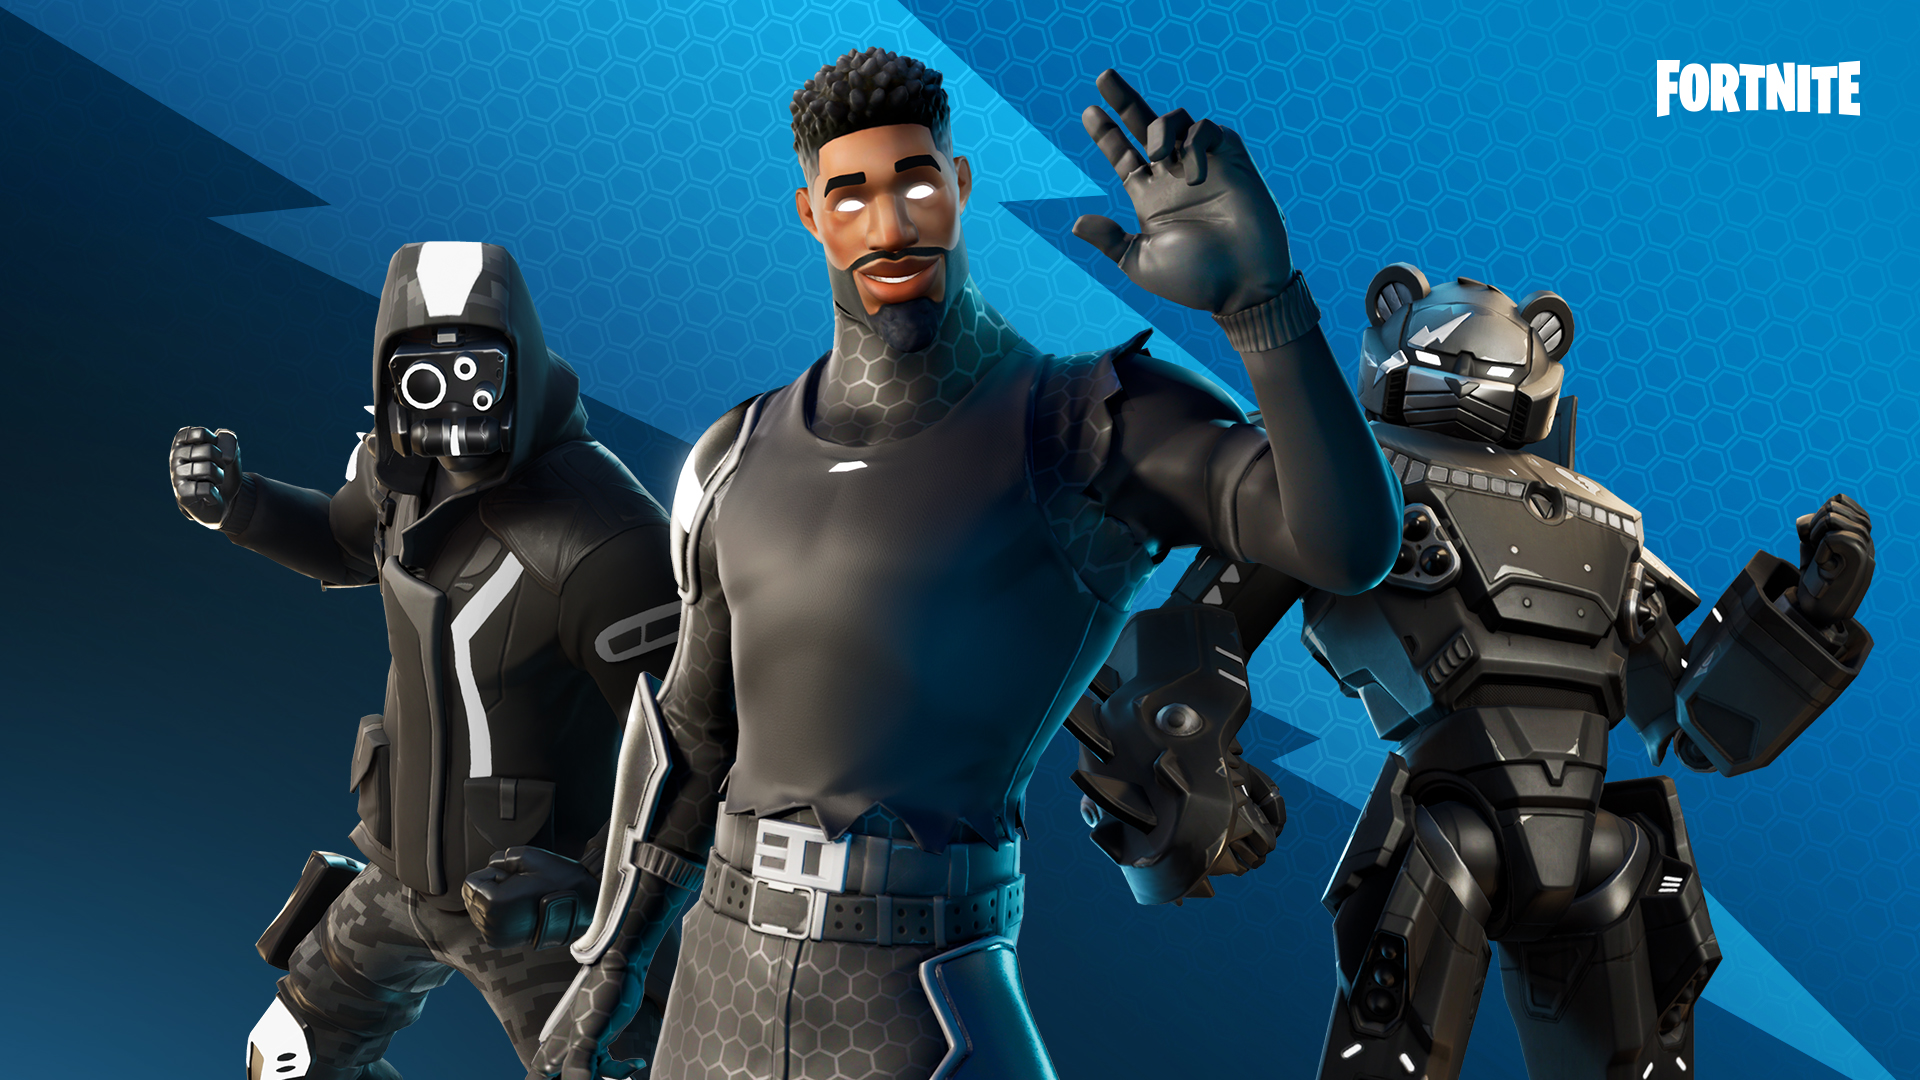 Leaked Item Shop - May 30th, 2022